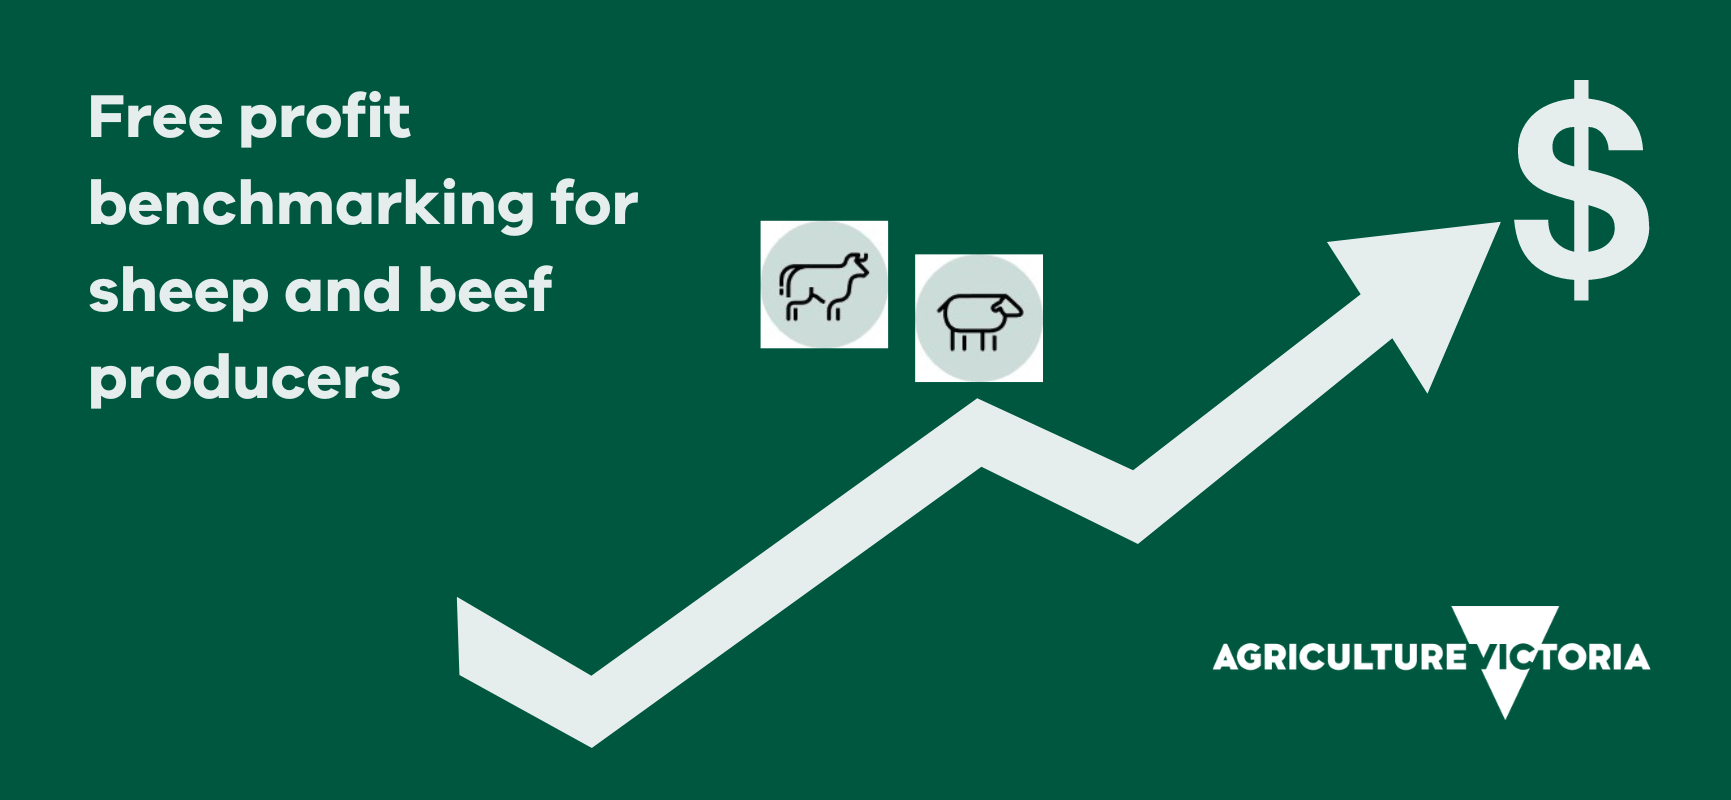 Free profit benchmarking for sheep and beef producers